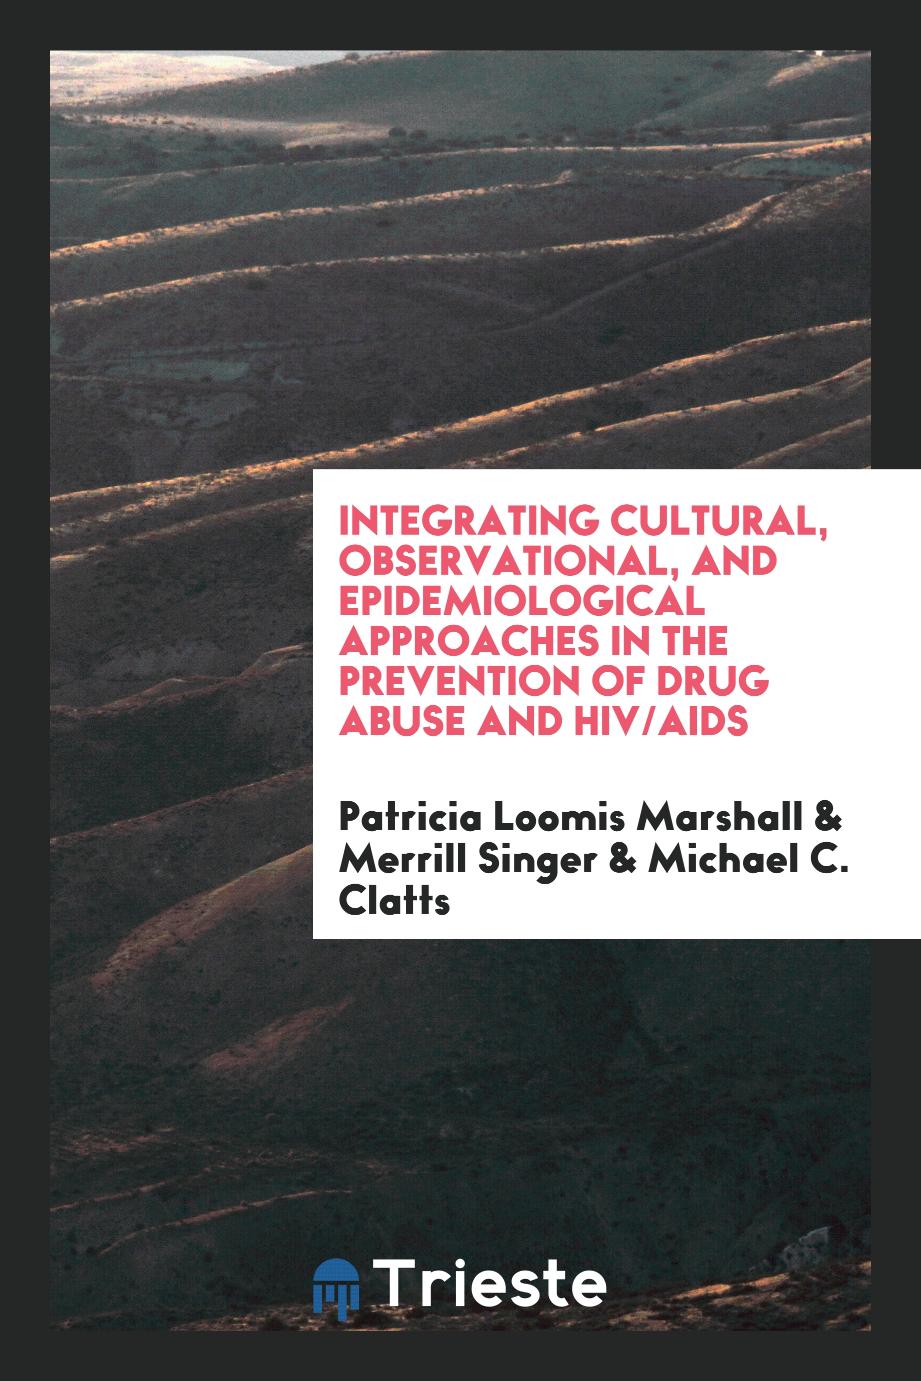 Integrating cultural, observational, and epidemiological approaches in the prevention of drug abuse and HIV/AIDS